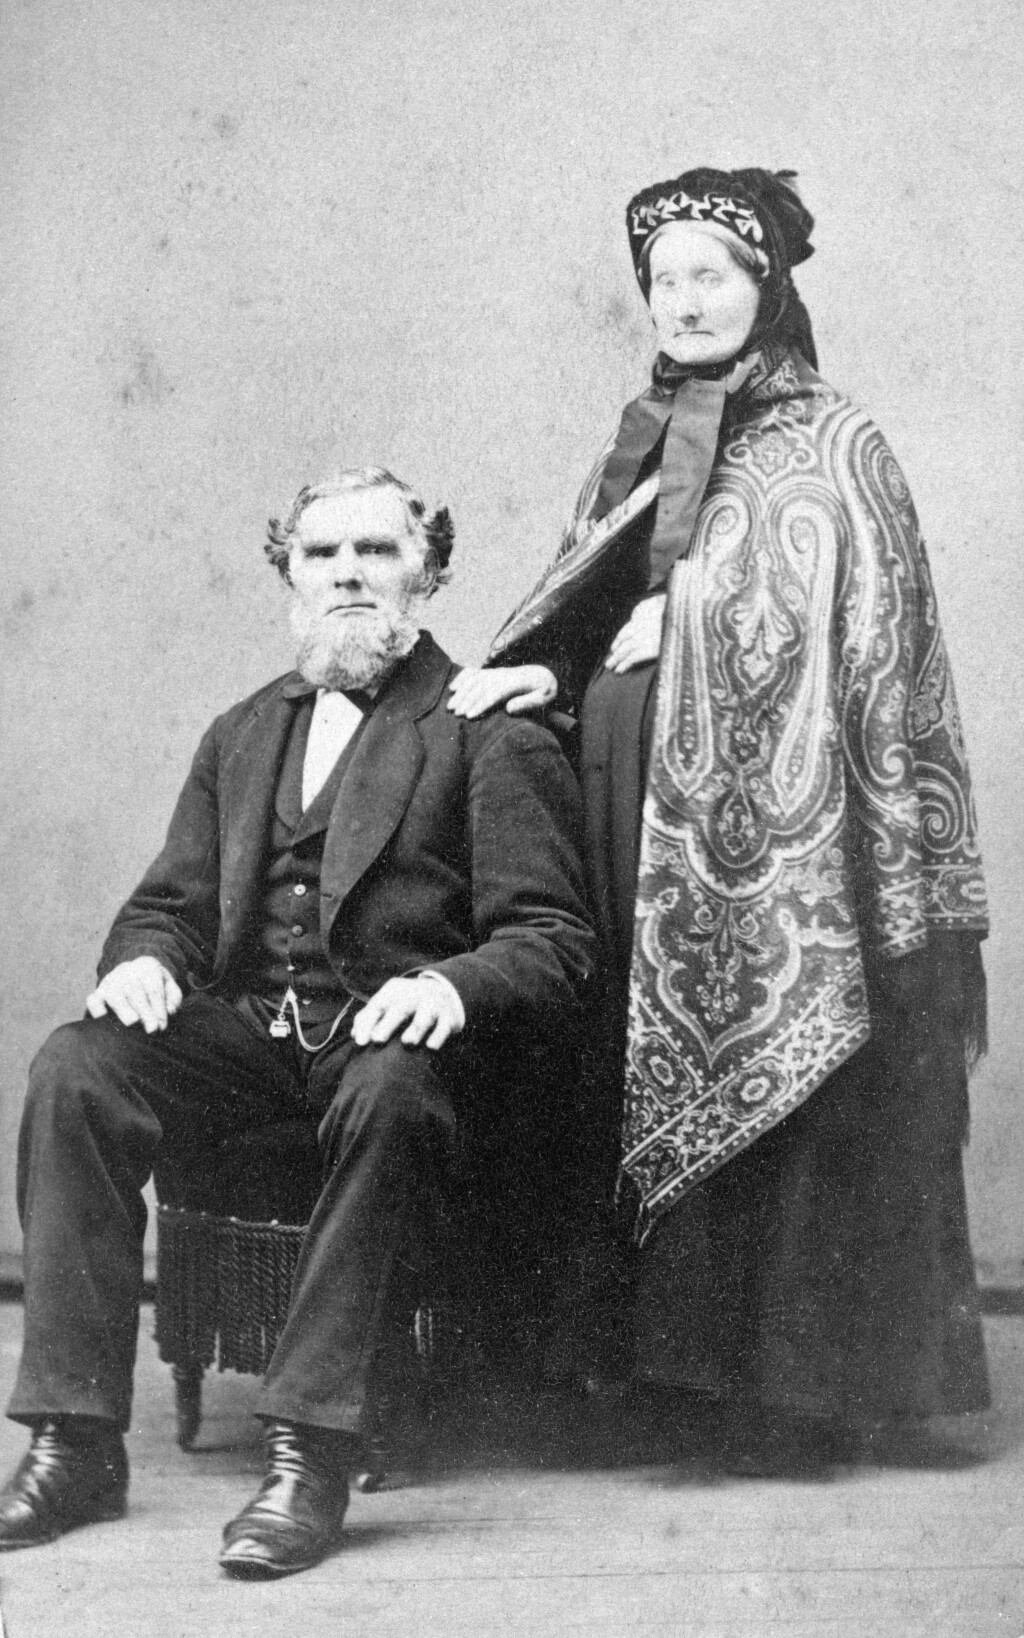 An old black and white photograph of a seated man in a suit and a standing woman with a patterned shawl.